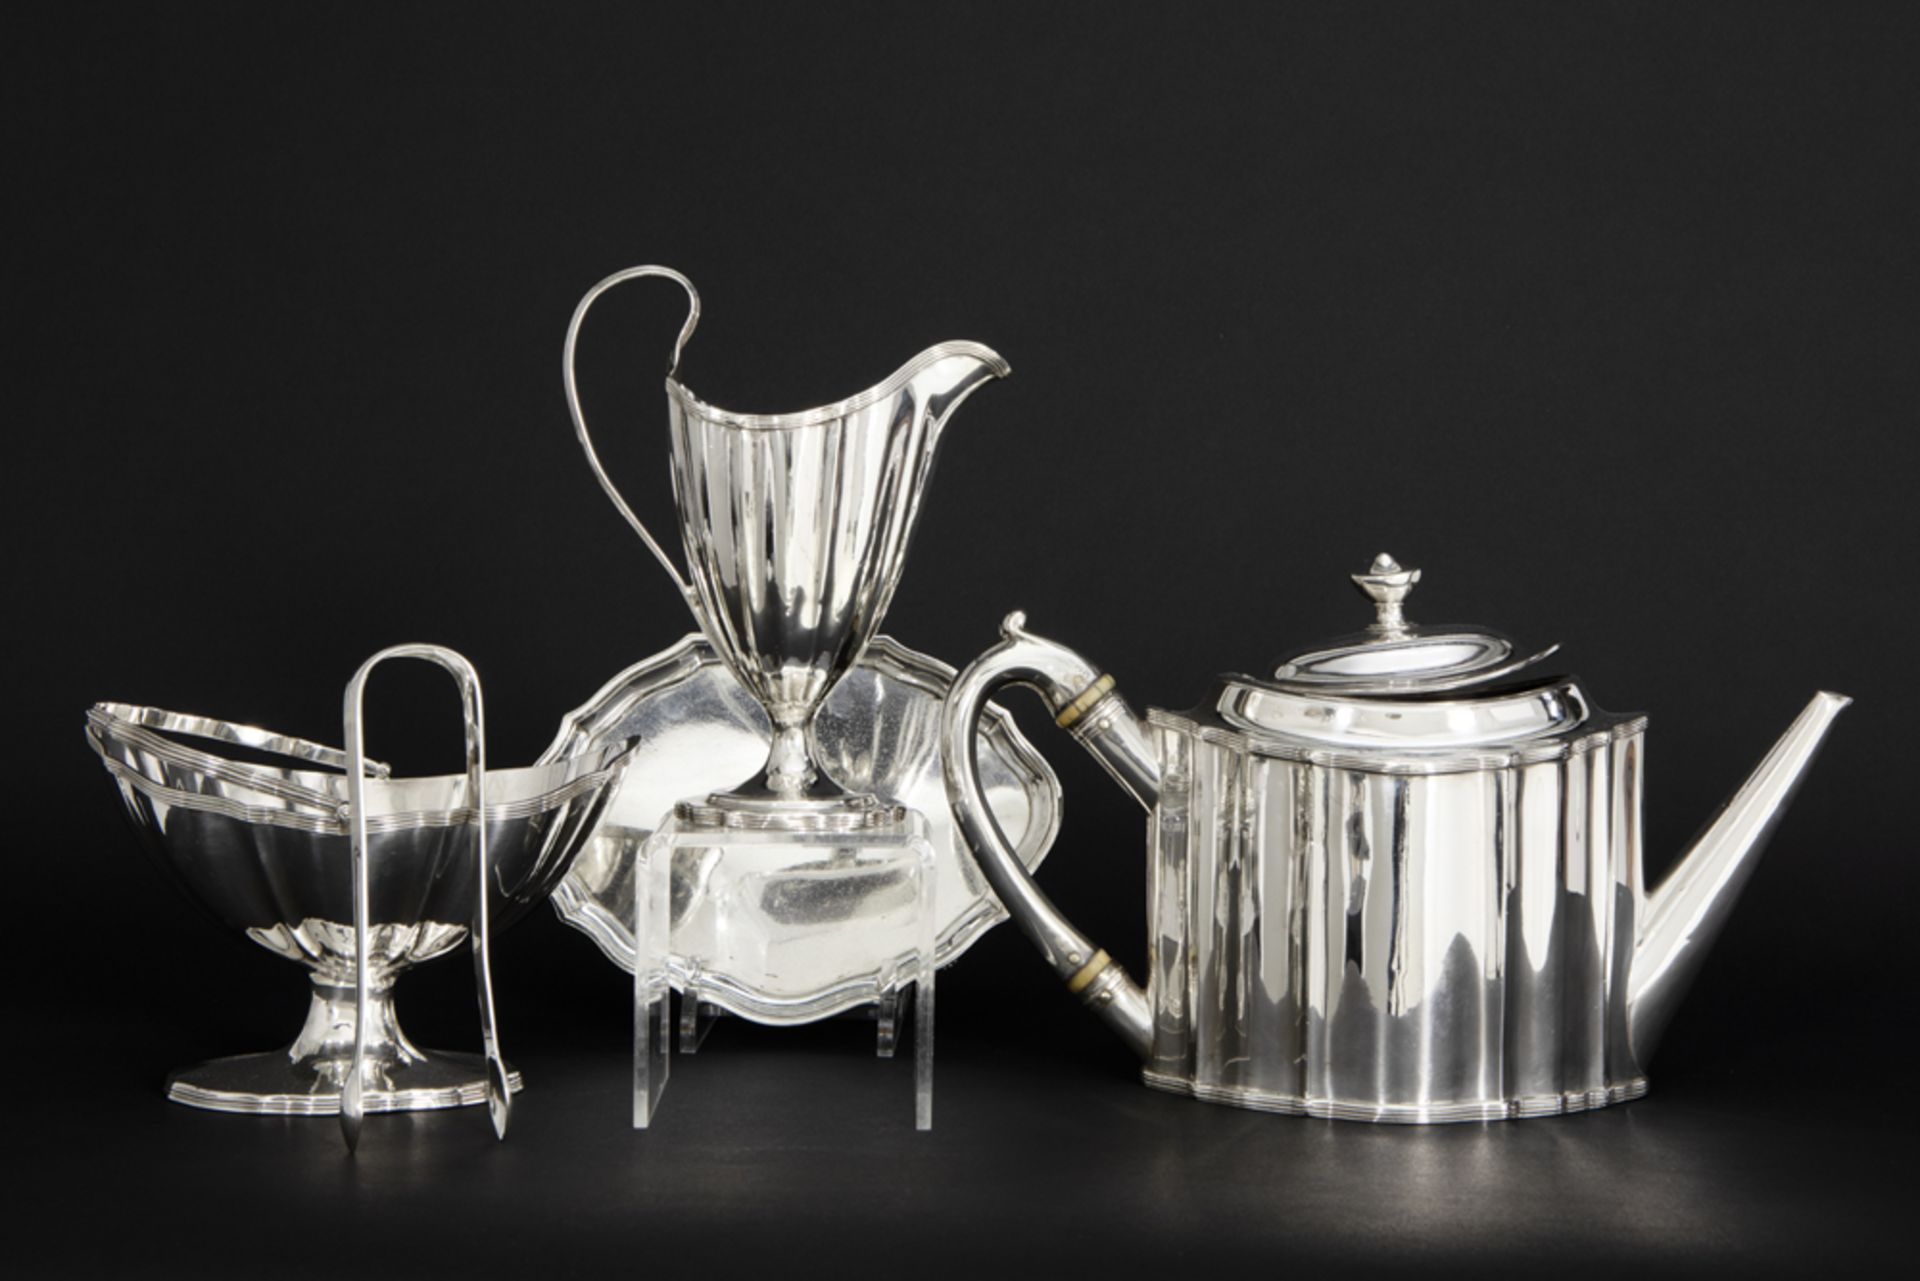 late 18th Cent. English neoclassical 3pc teaset with matching dish (for the teapot) in Peter & Ann - Image 2 of 3